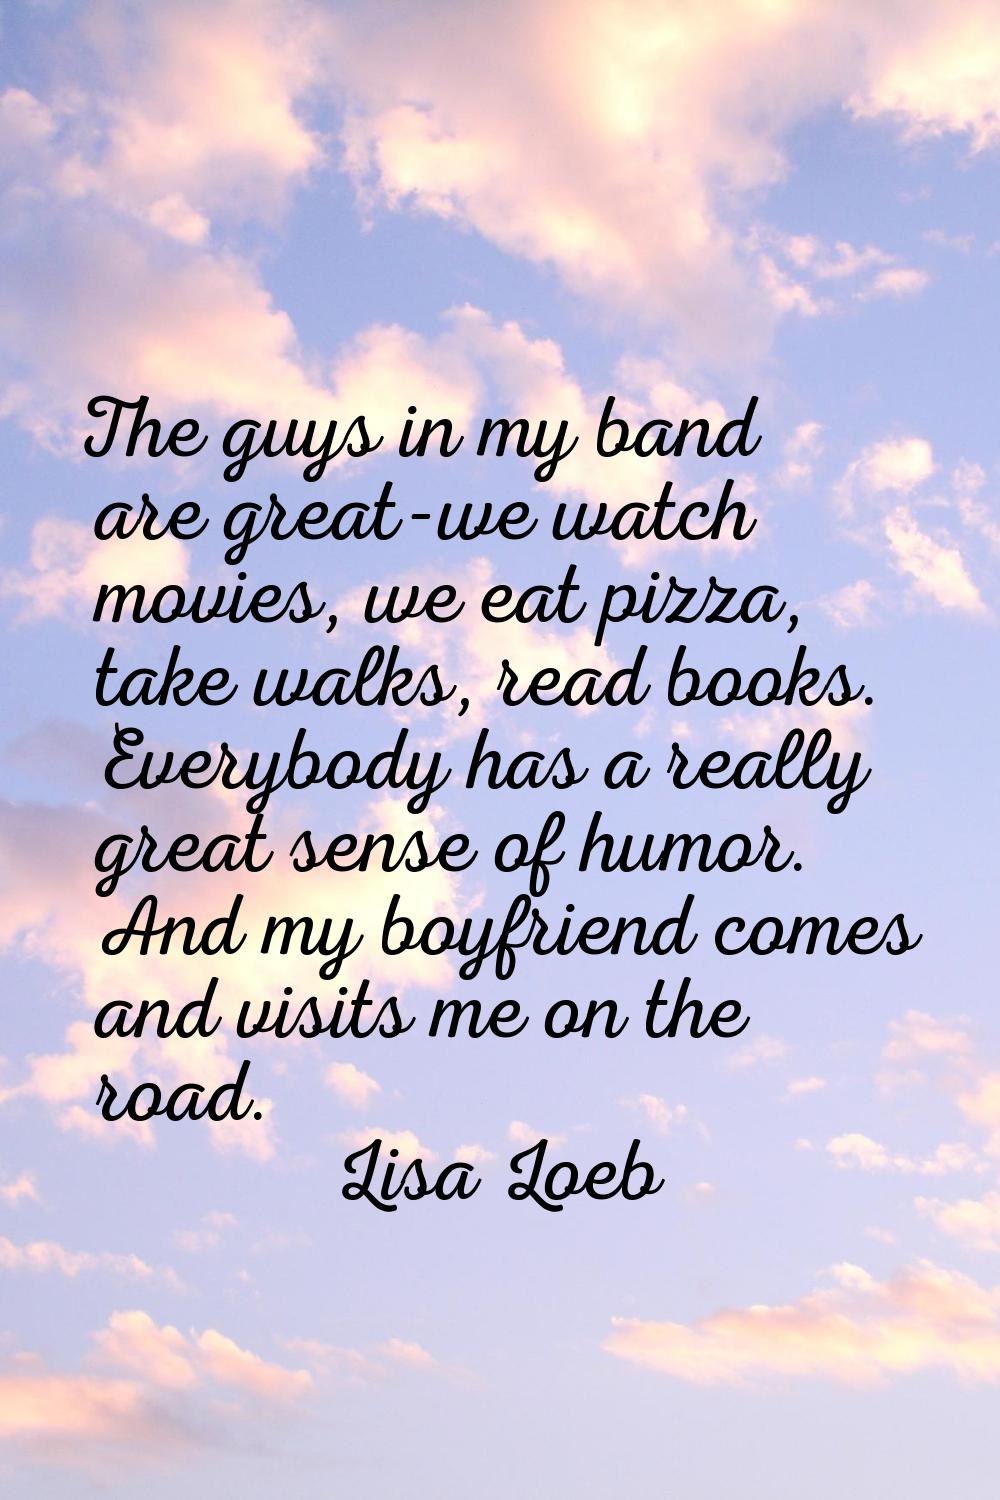 The guys in my band are great-we watch movies, we eat pizza, take walks, read books. Everybody has 